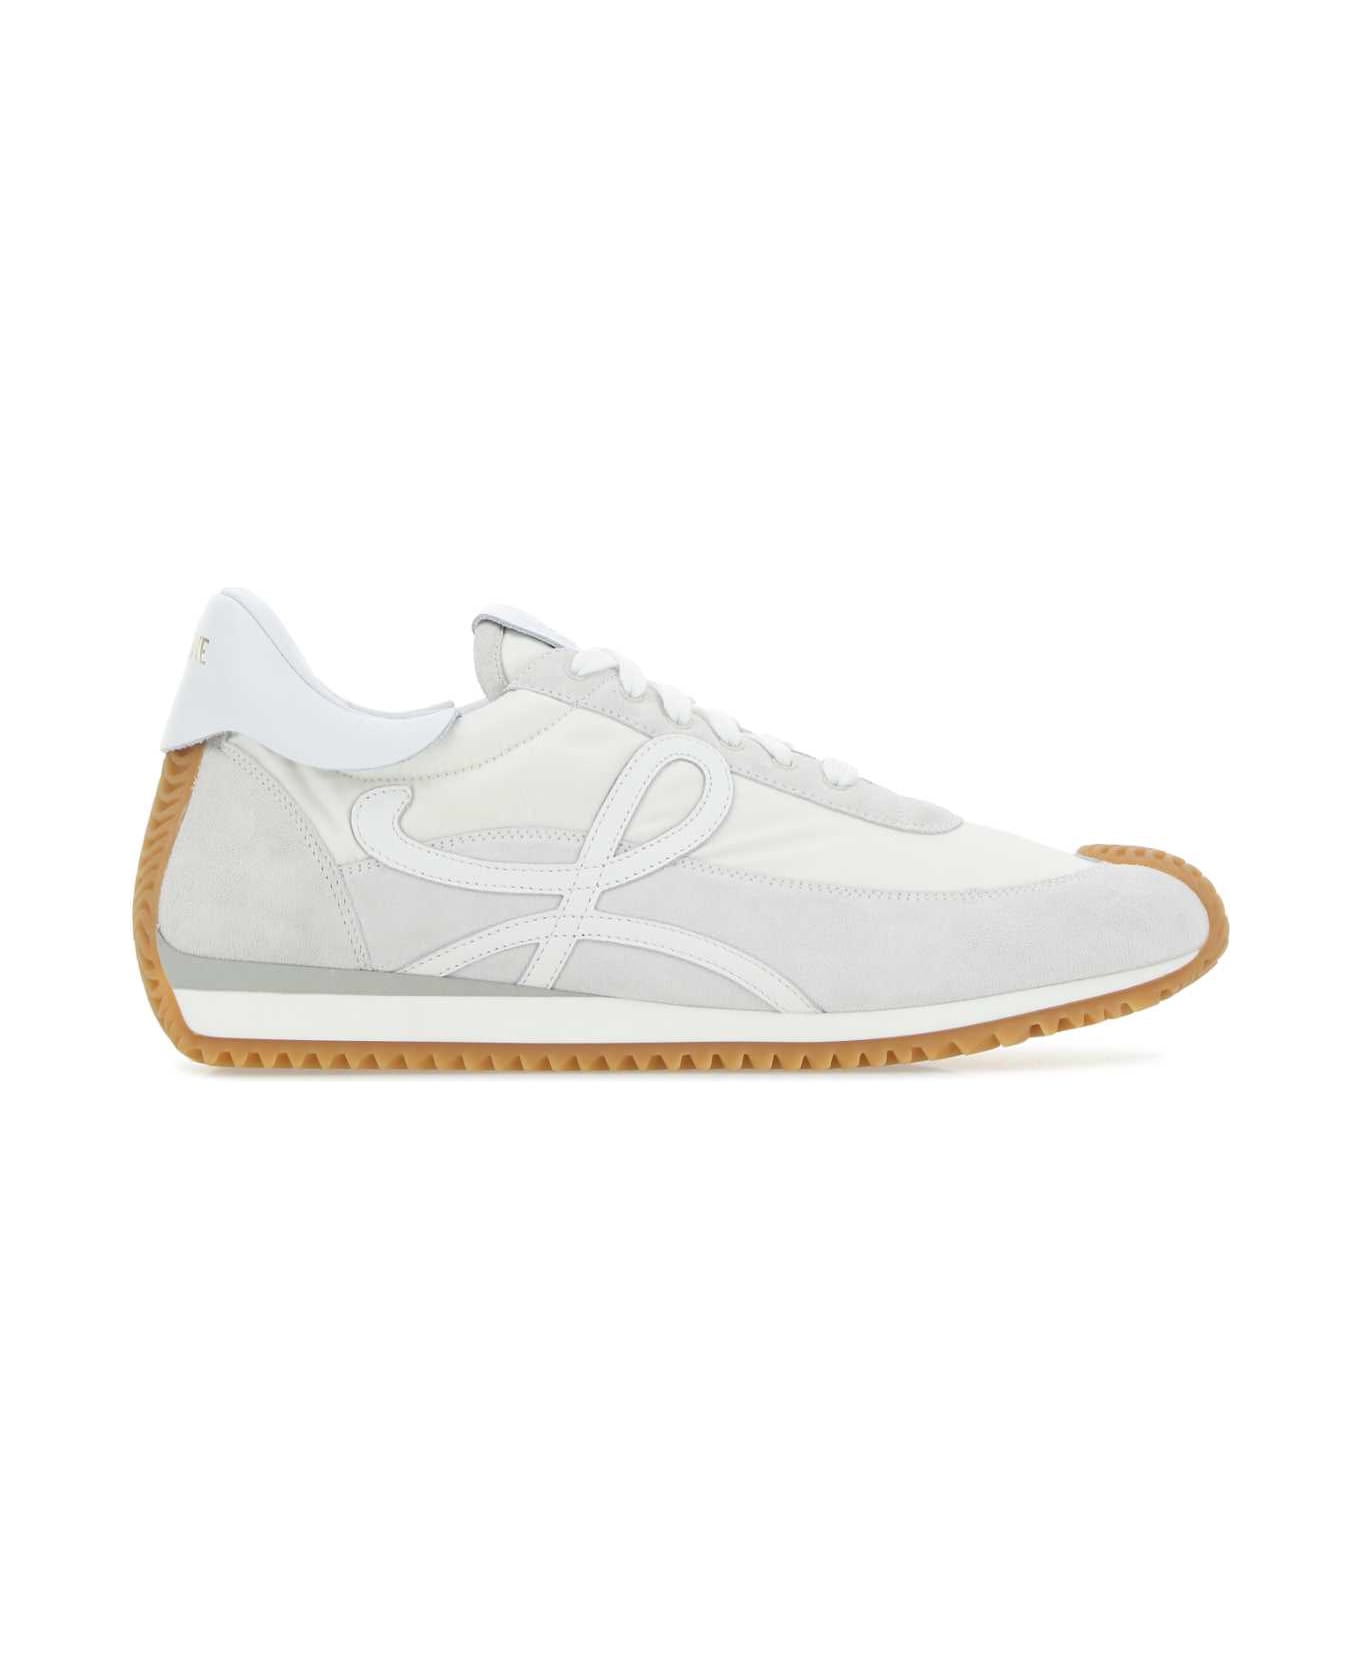 Loewe Multicolor Fabric And Suede Ballet Sneakers - WHITE